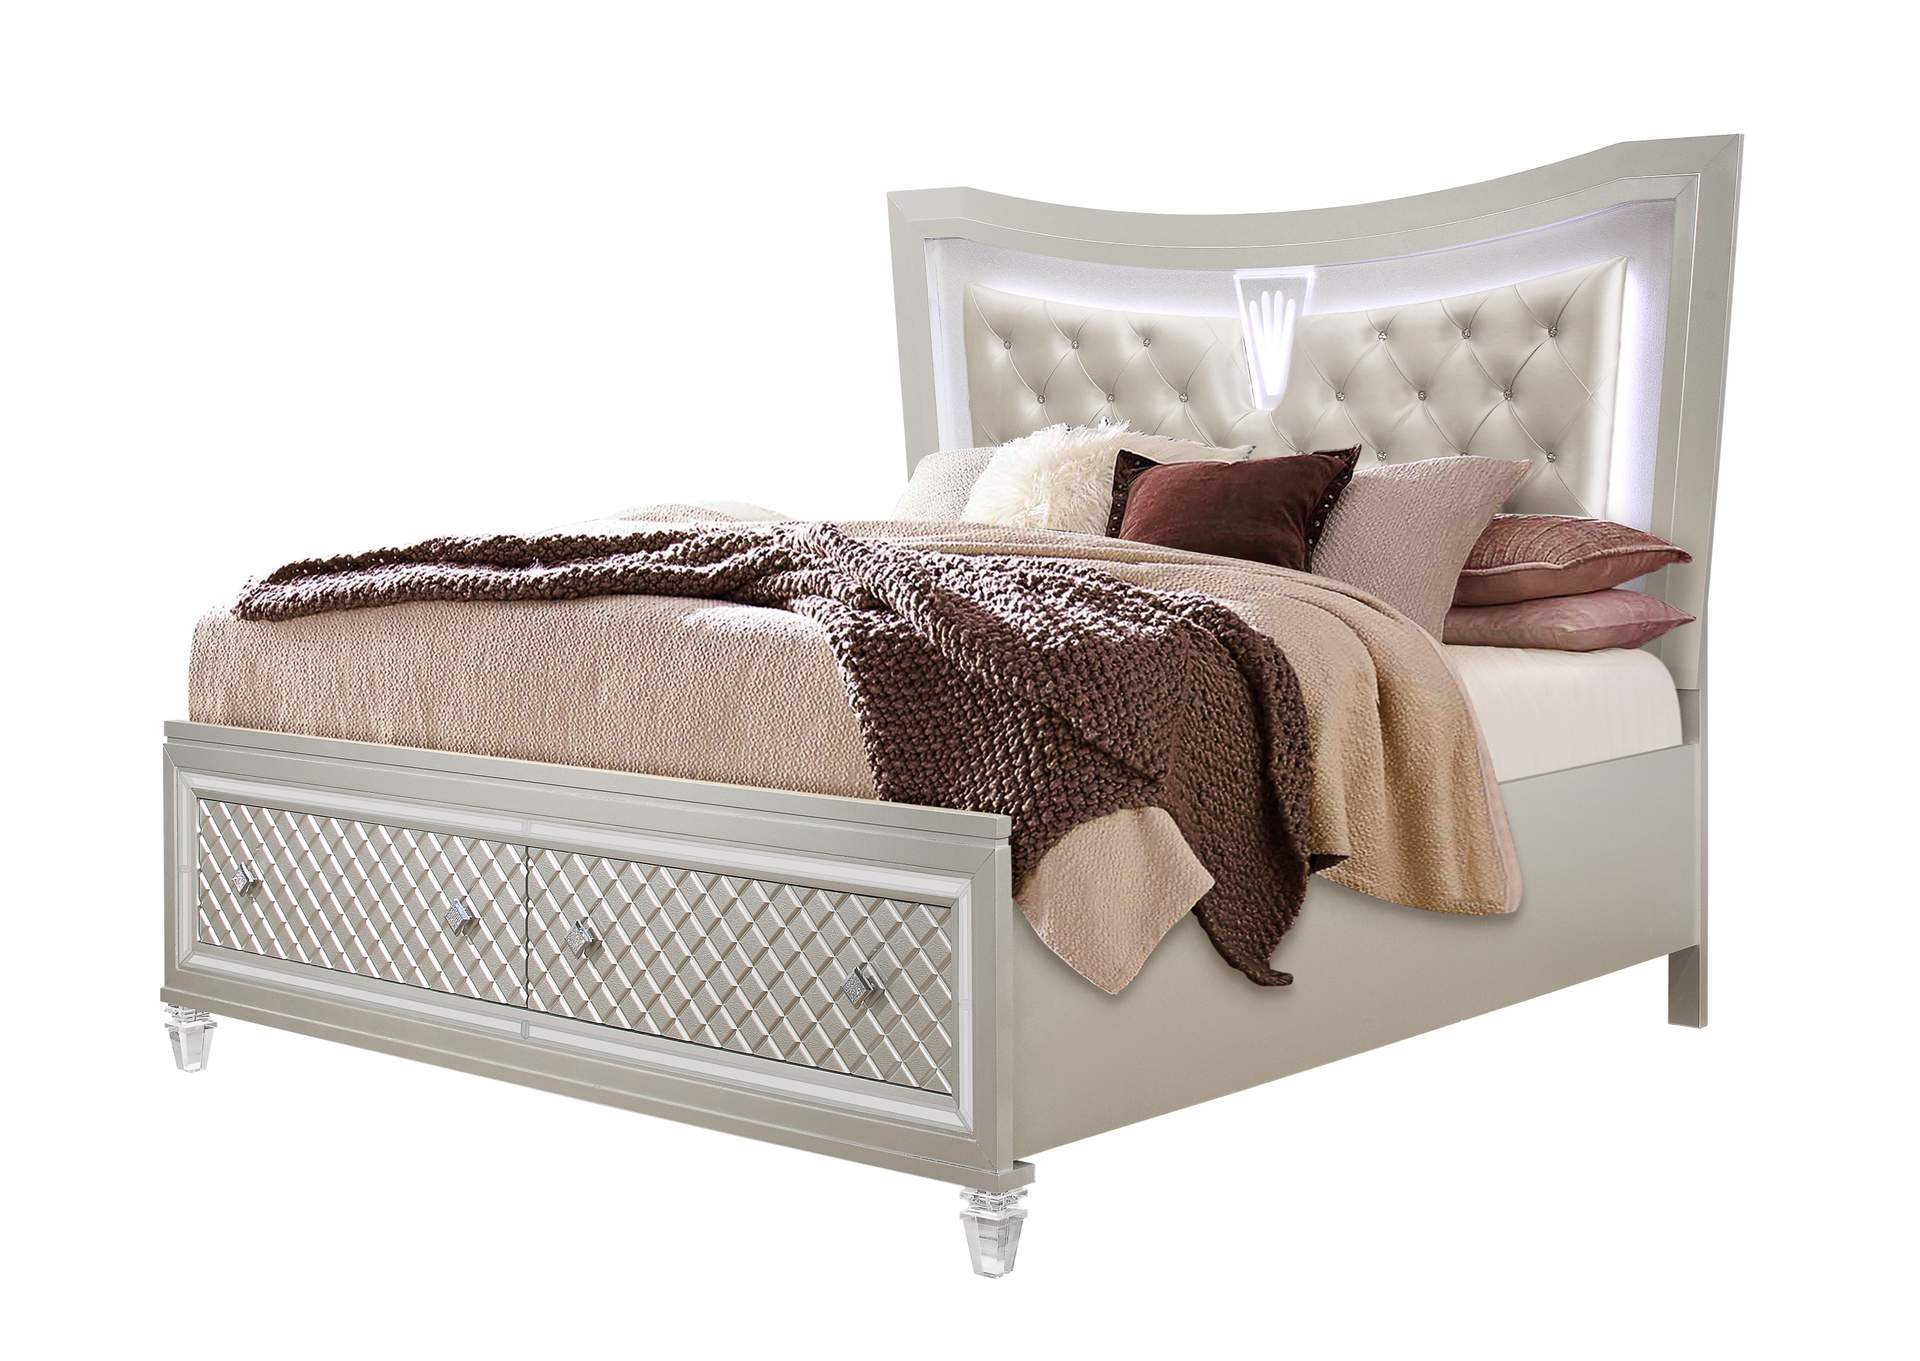 Champagne Paris King Bed Best, Champagne King Bed